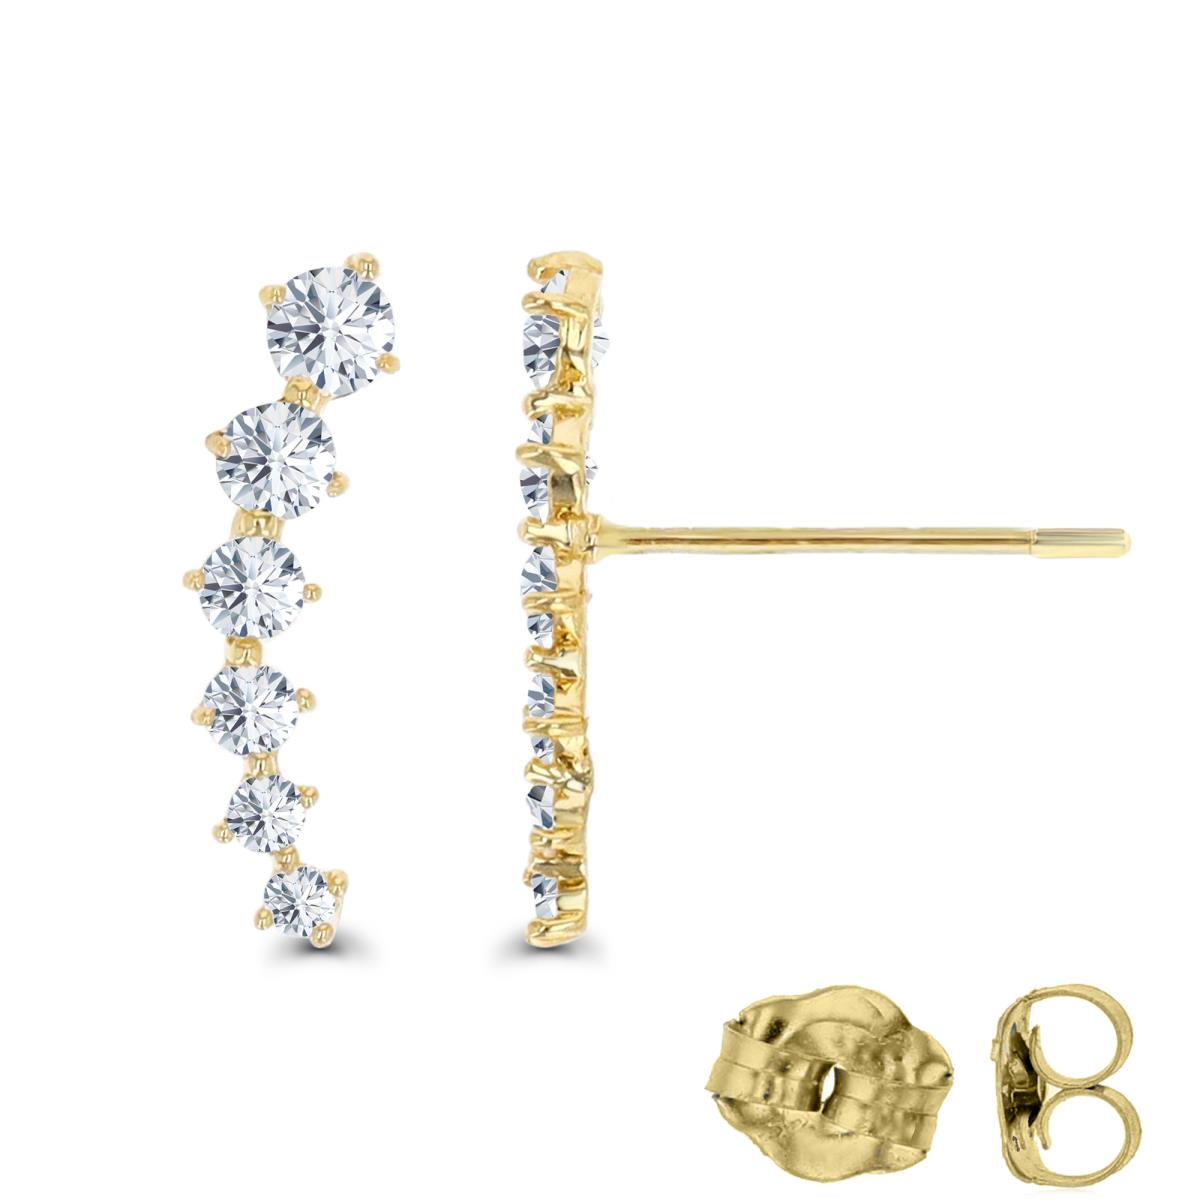 14K Yellow Gold Graduated Round Cut Ear Crawler CZ Stud Earring with Gold Butterfly Backs